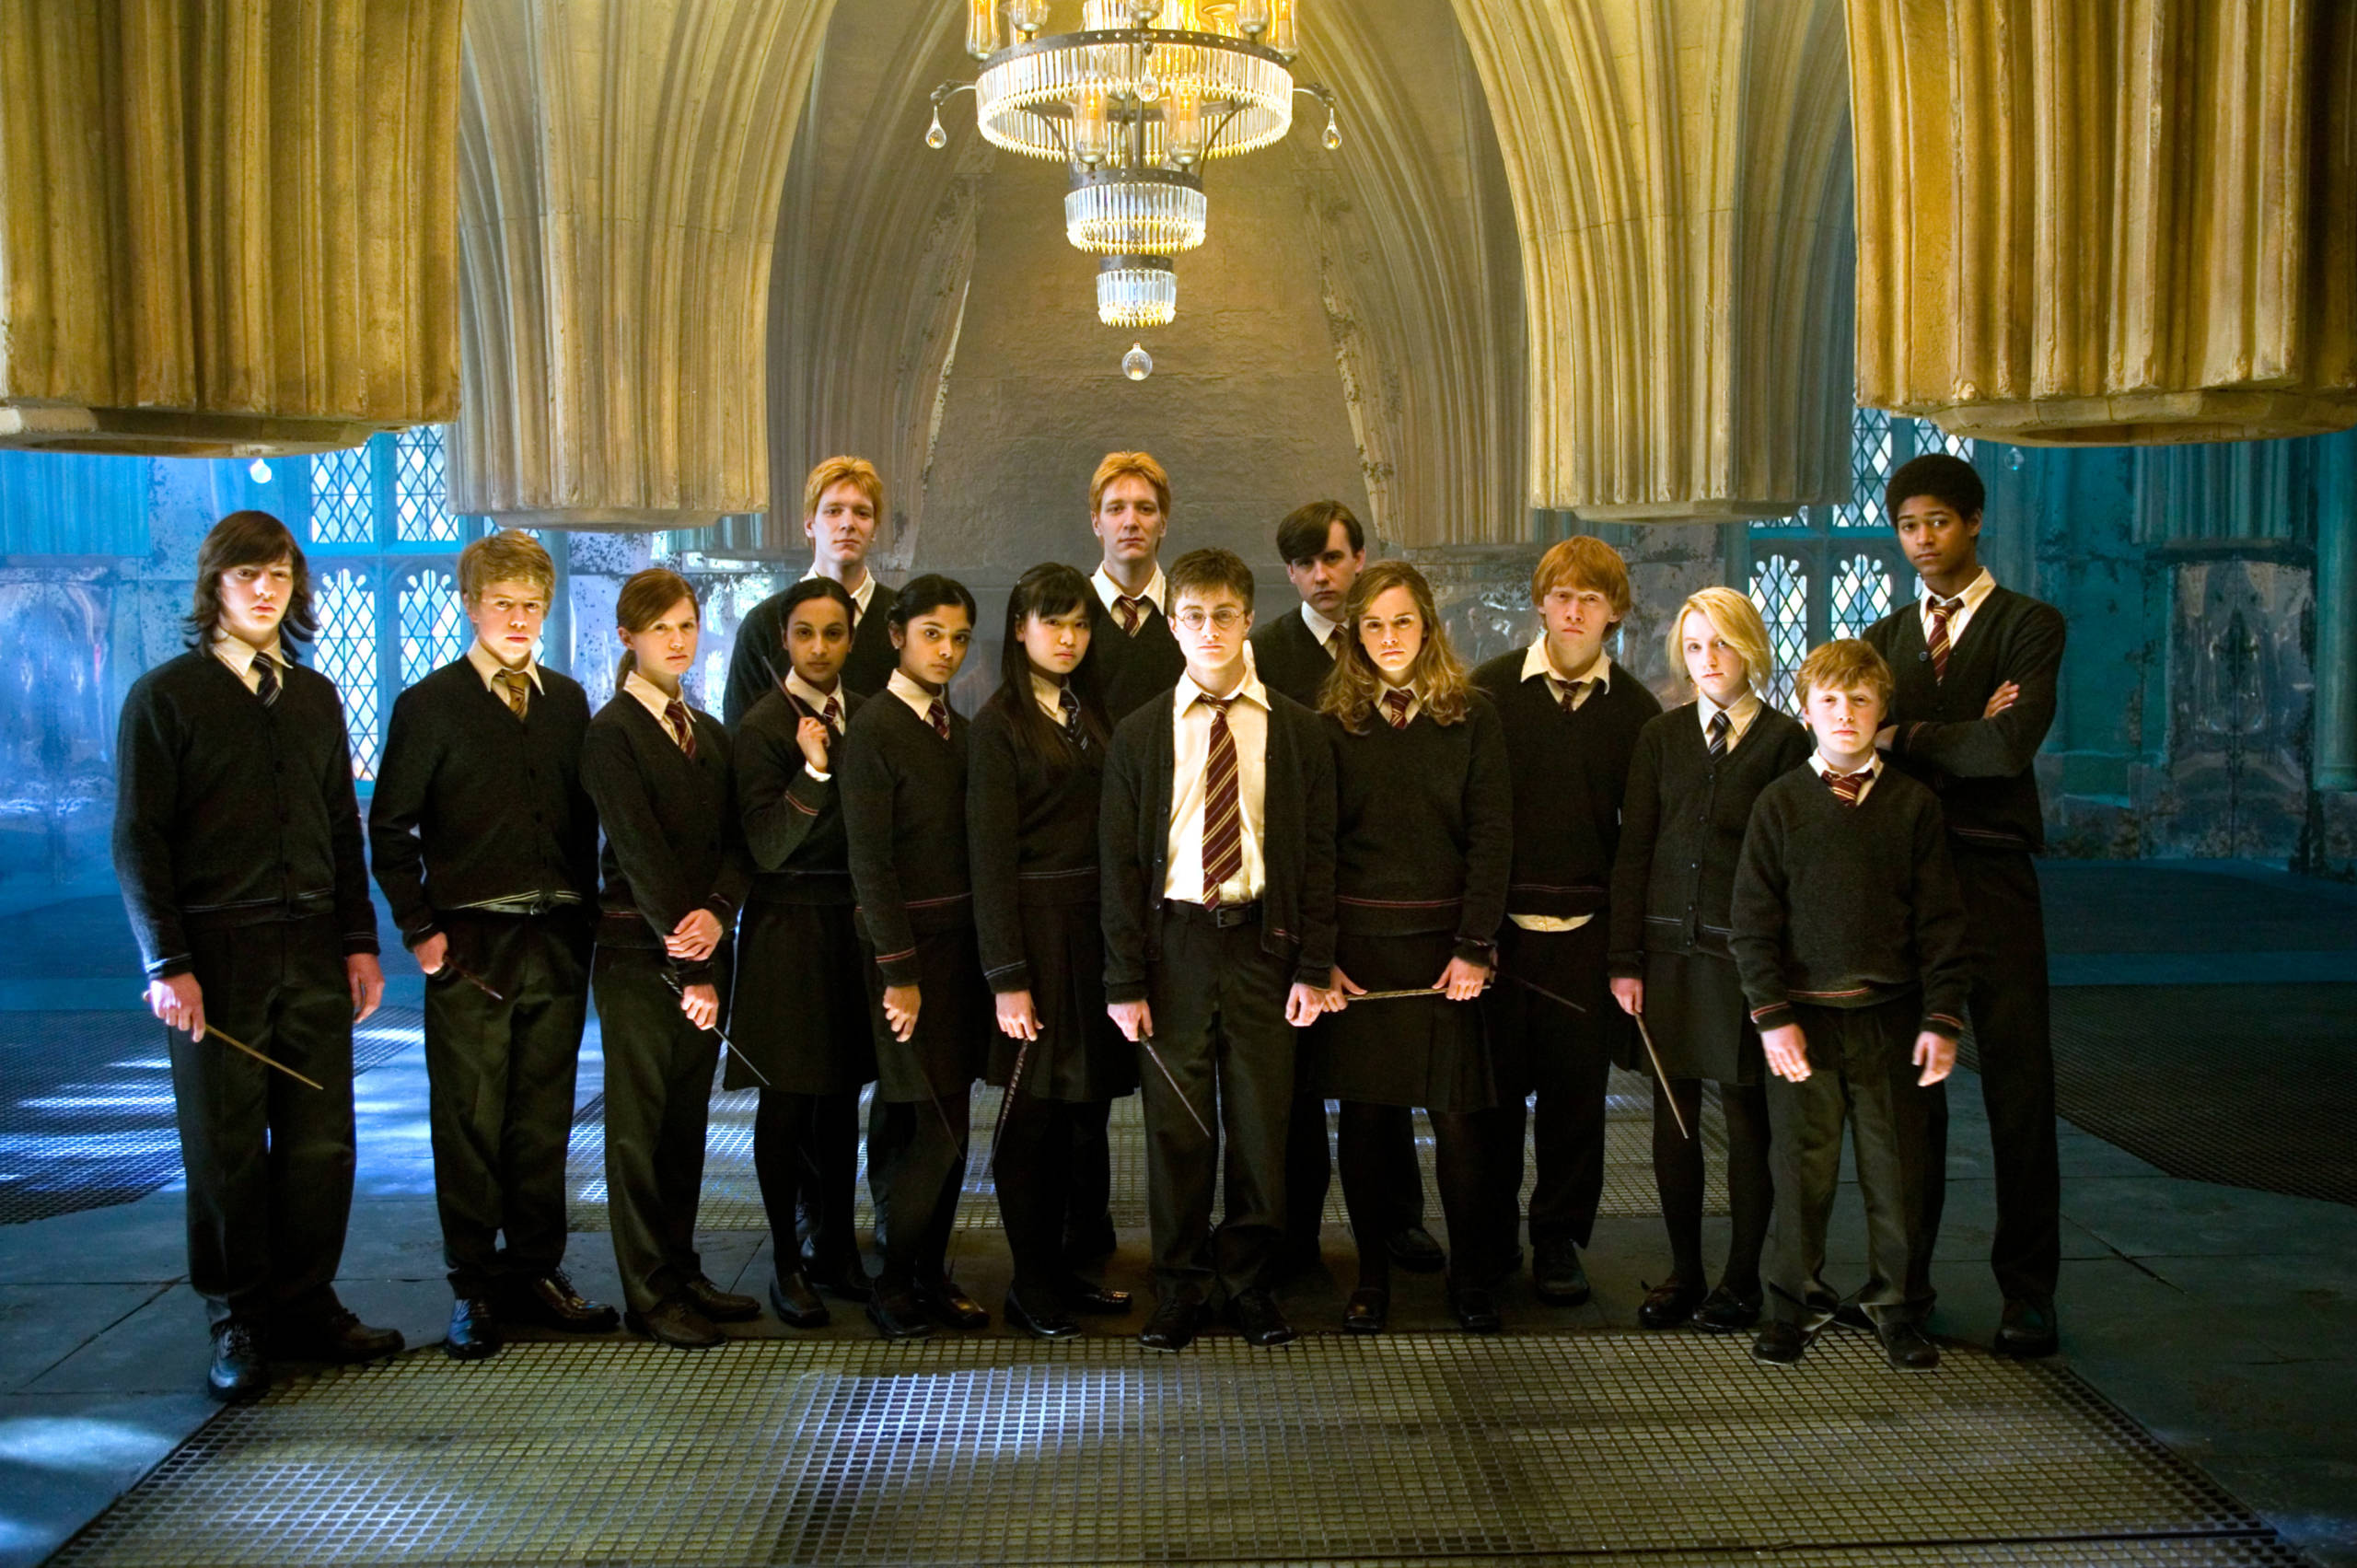 Harry and Dumbledore's Army in the Room of Requirement 